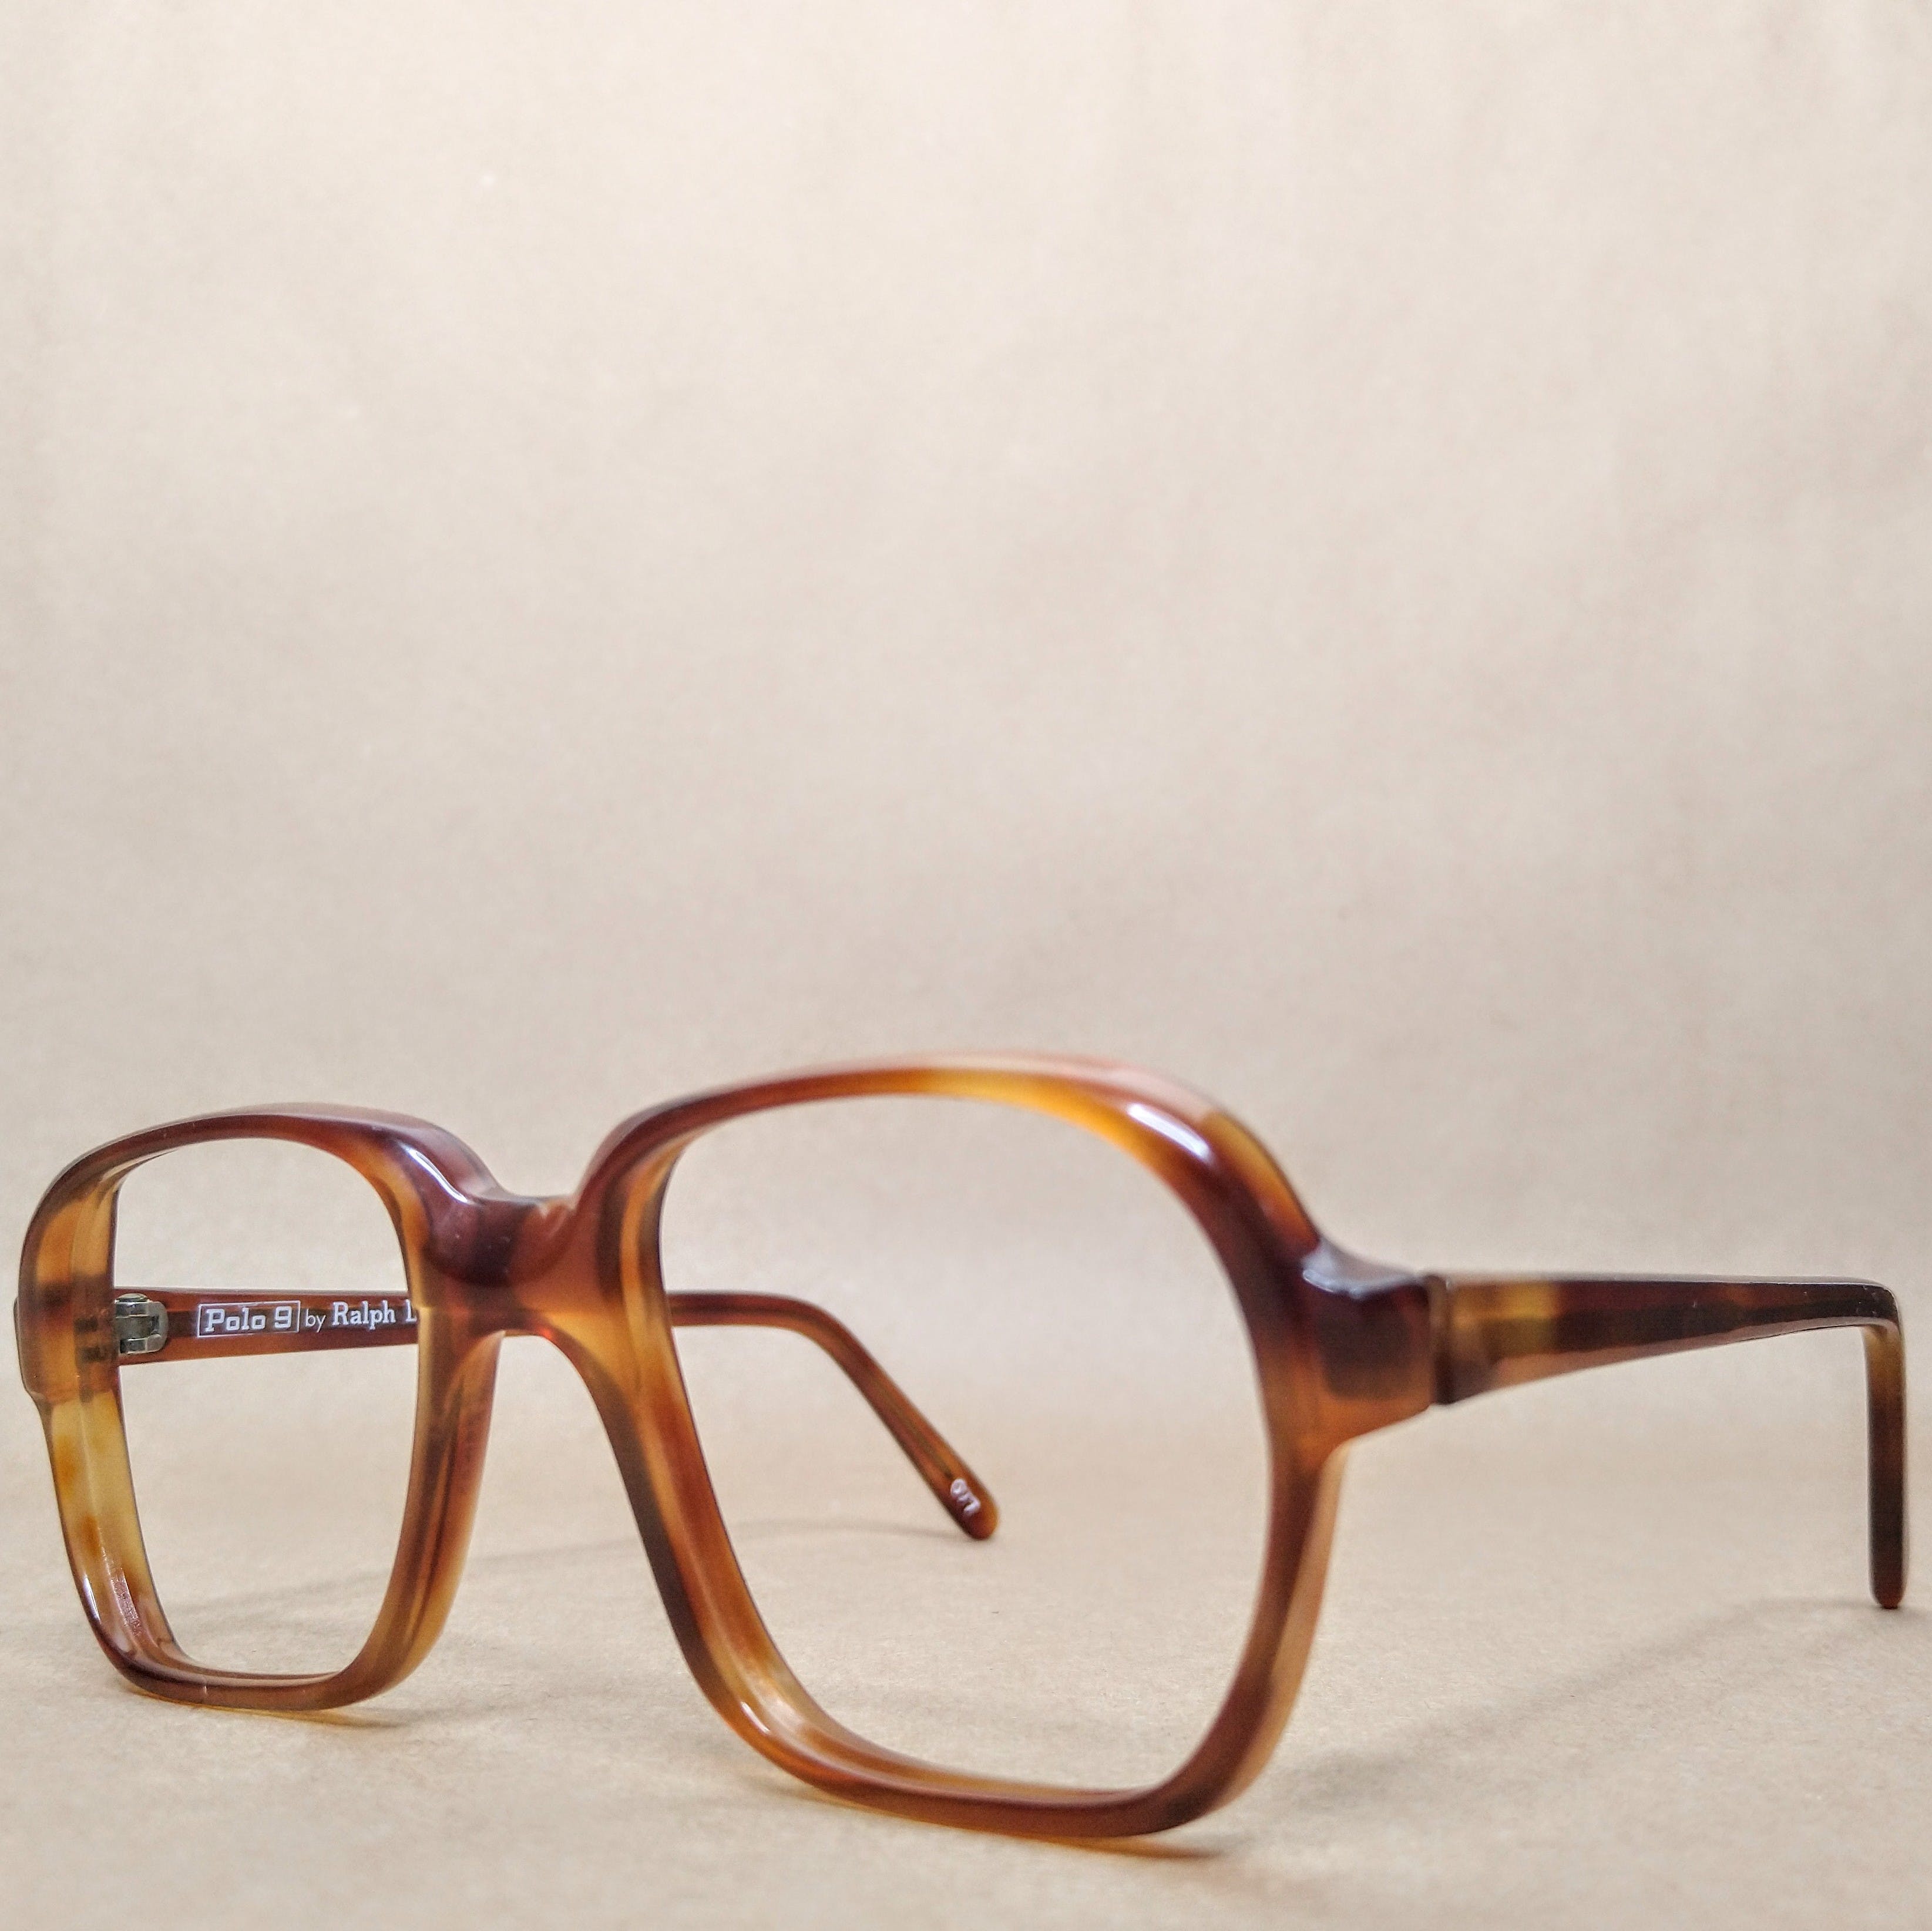 70's Vintage Polo 9 Sunglasses Eyeglasses Frame by Ralph Lauren Polo X |  Shop THRILLING